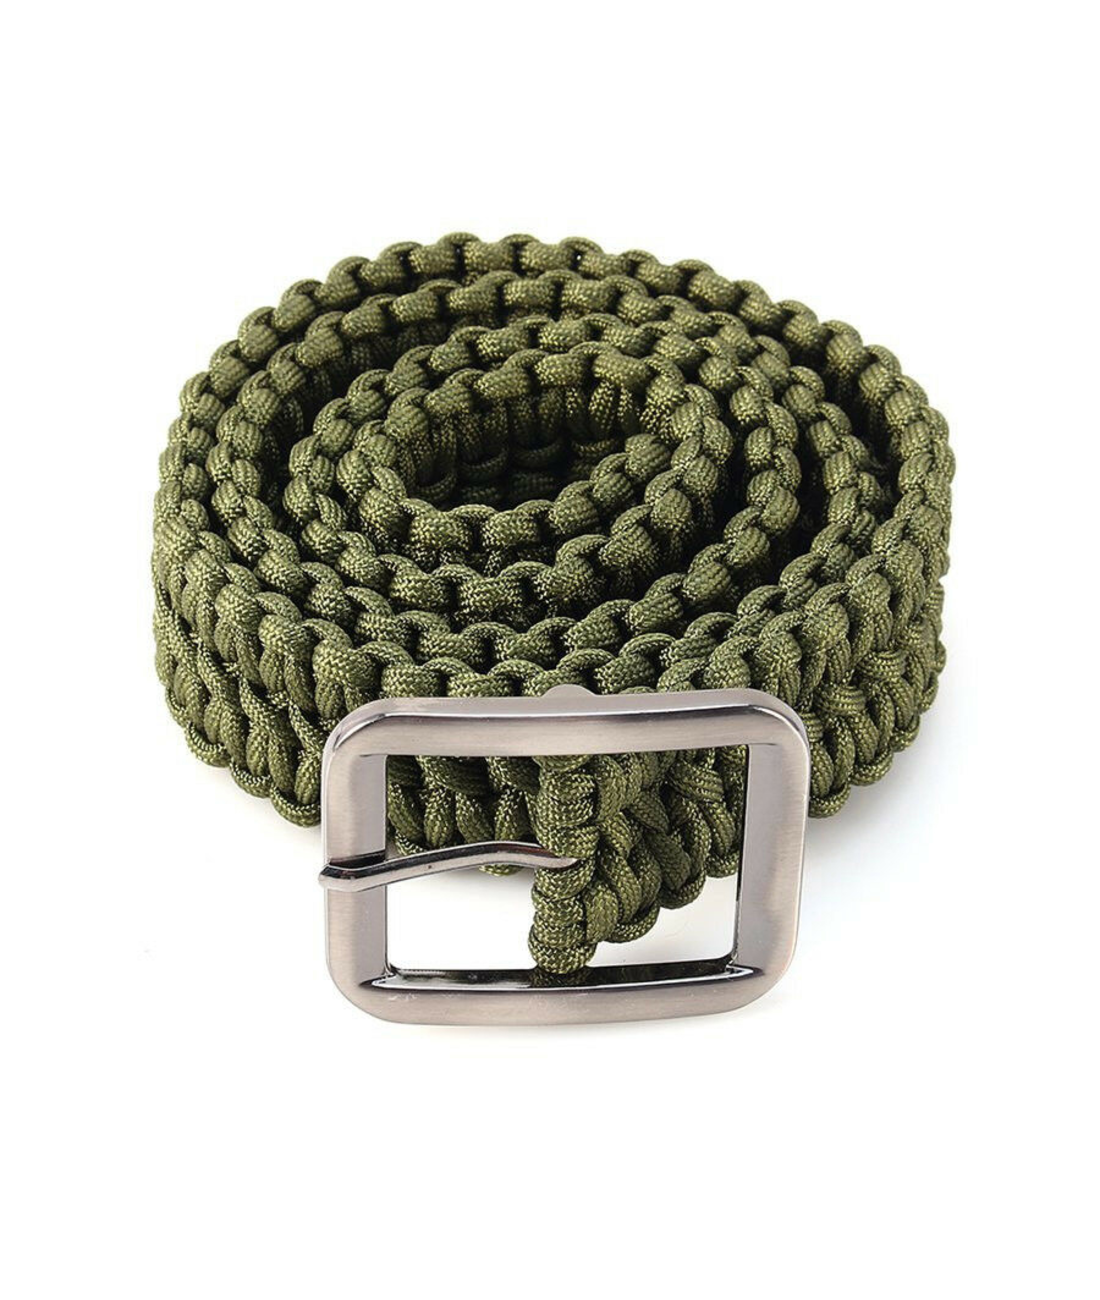 Grtel Paracord